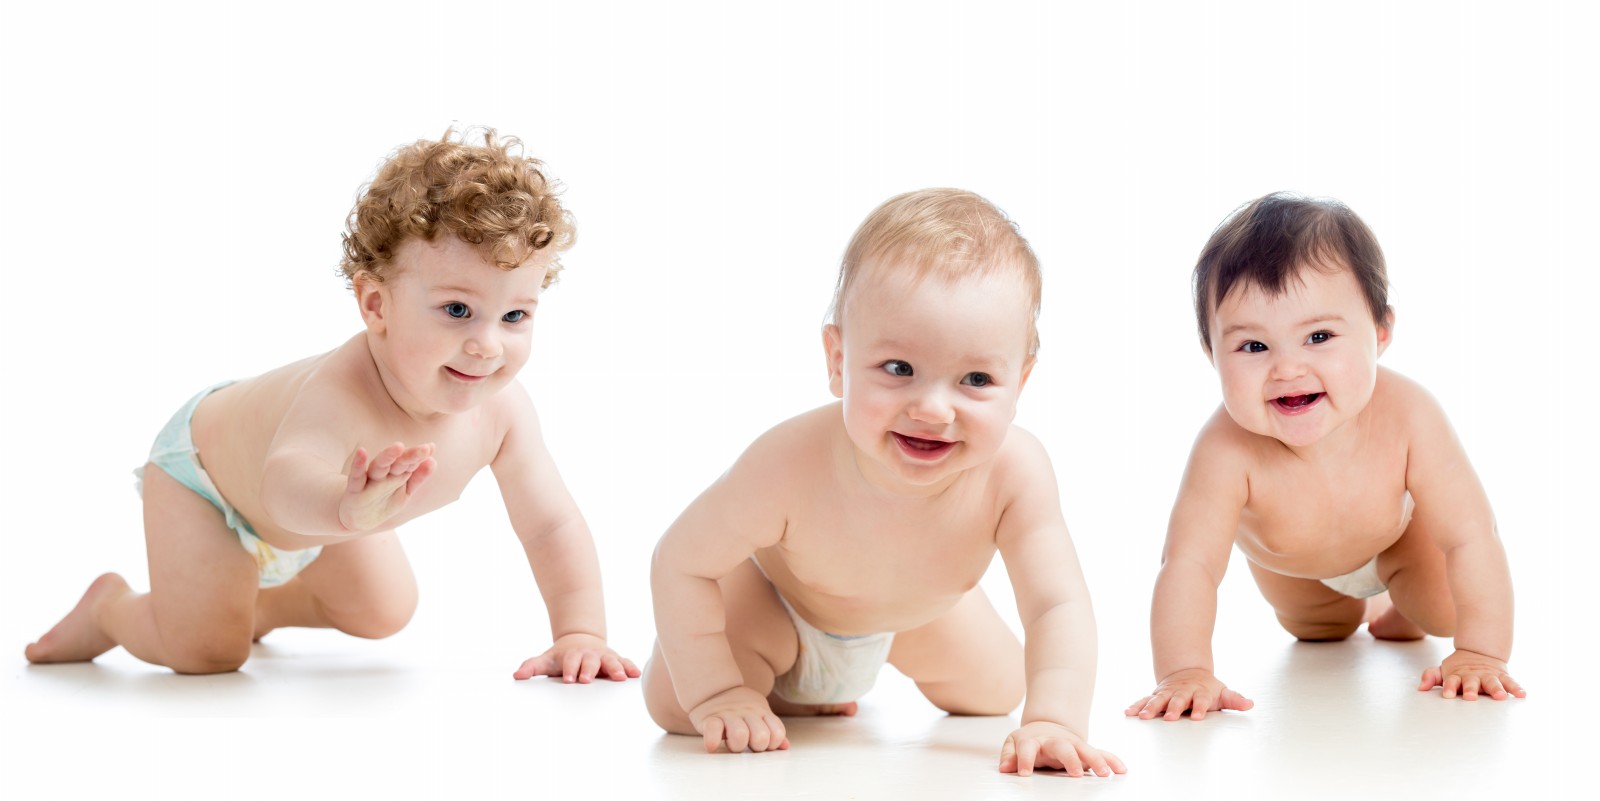 Top 10 Weird Facts About Babies | DailyPedia